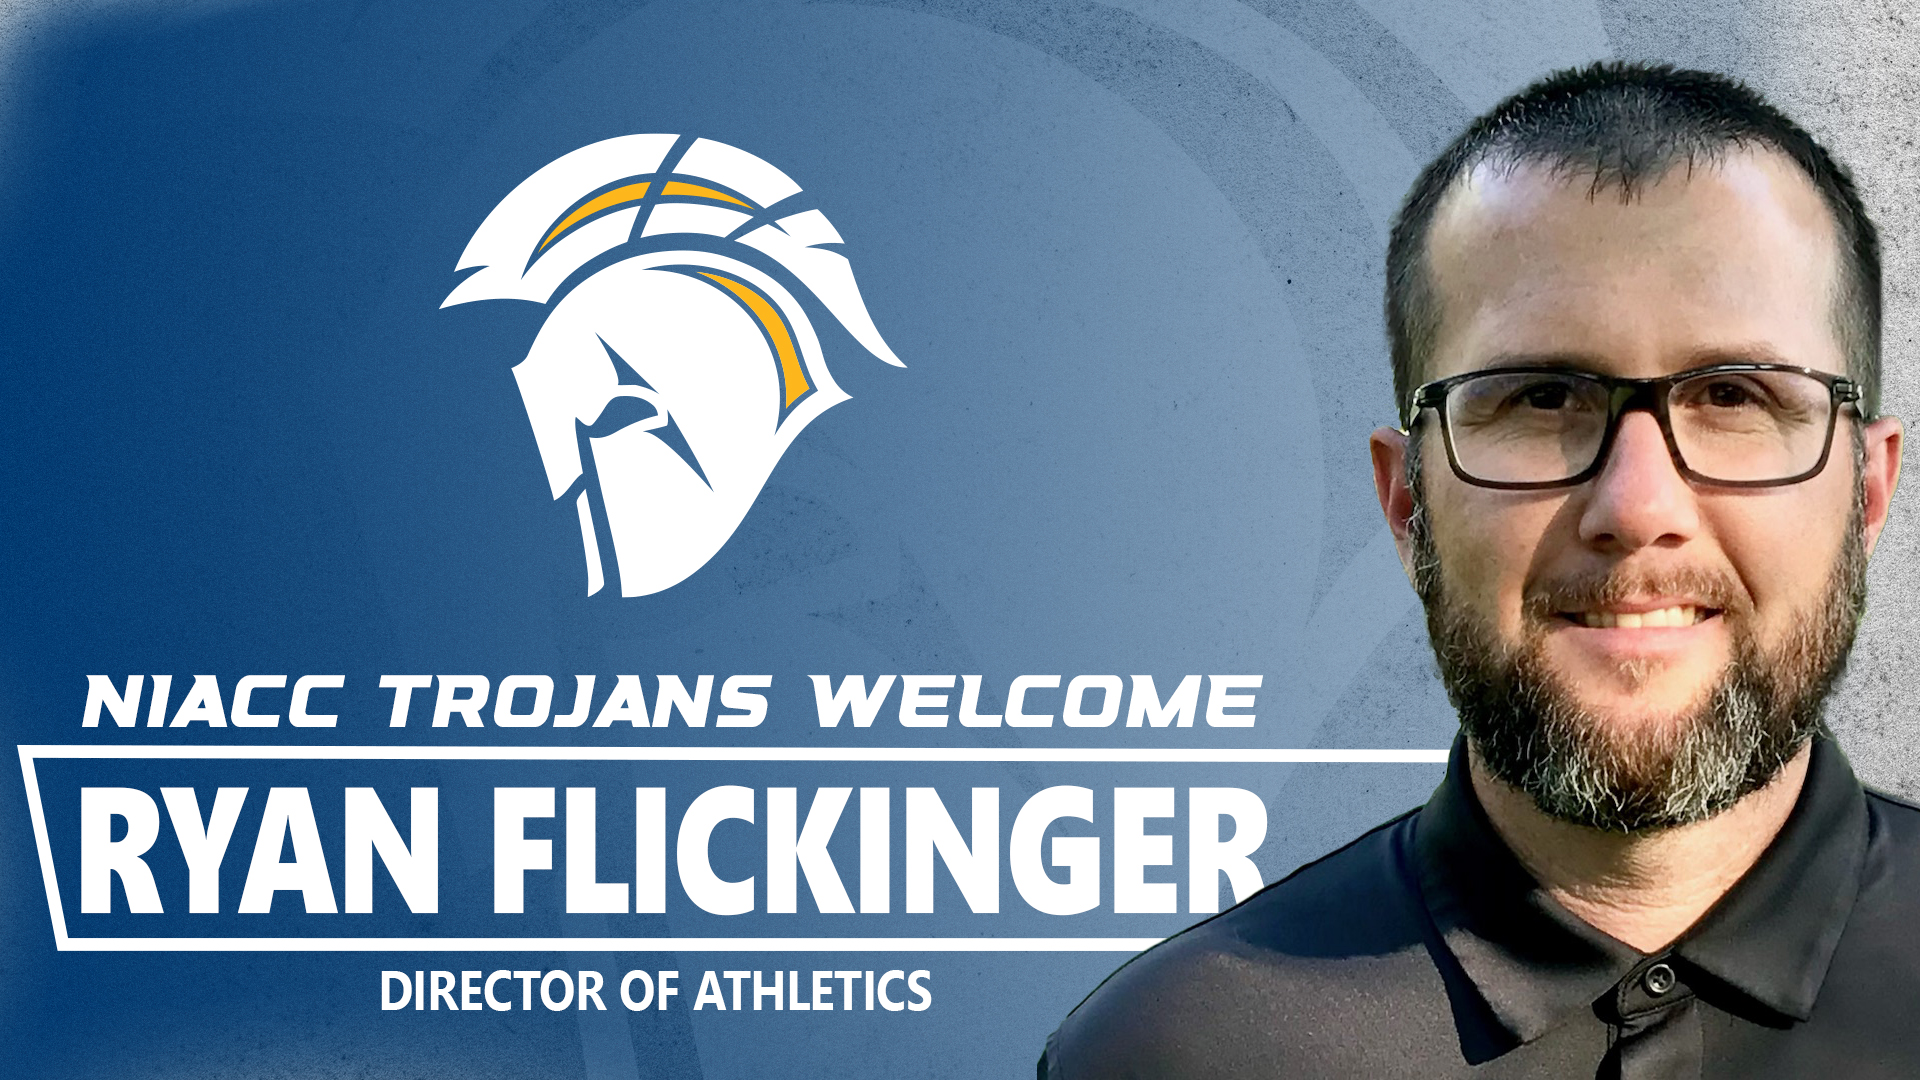 Flickinger named NIACC athletic director - NIACC Minute